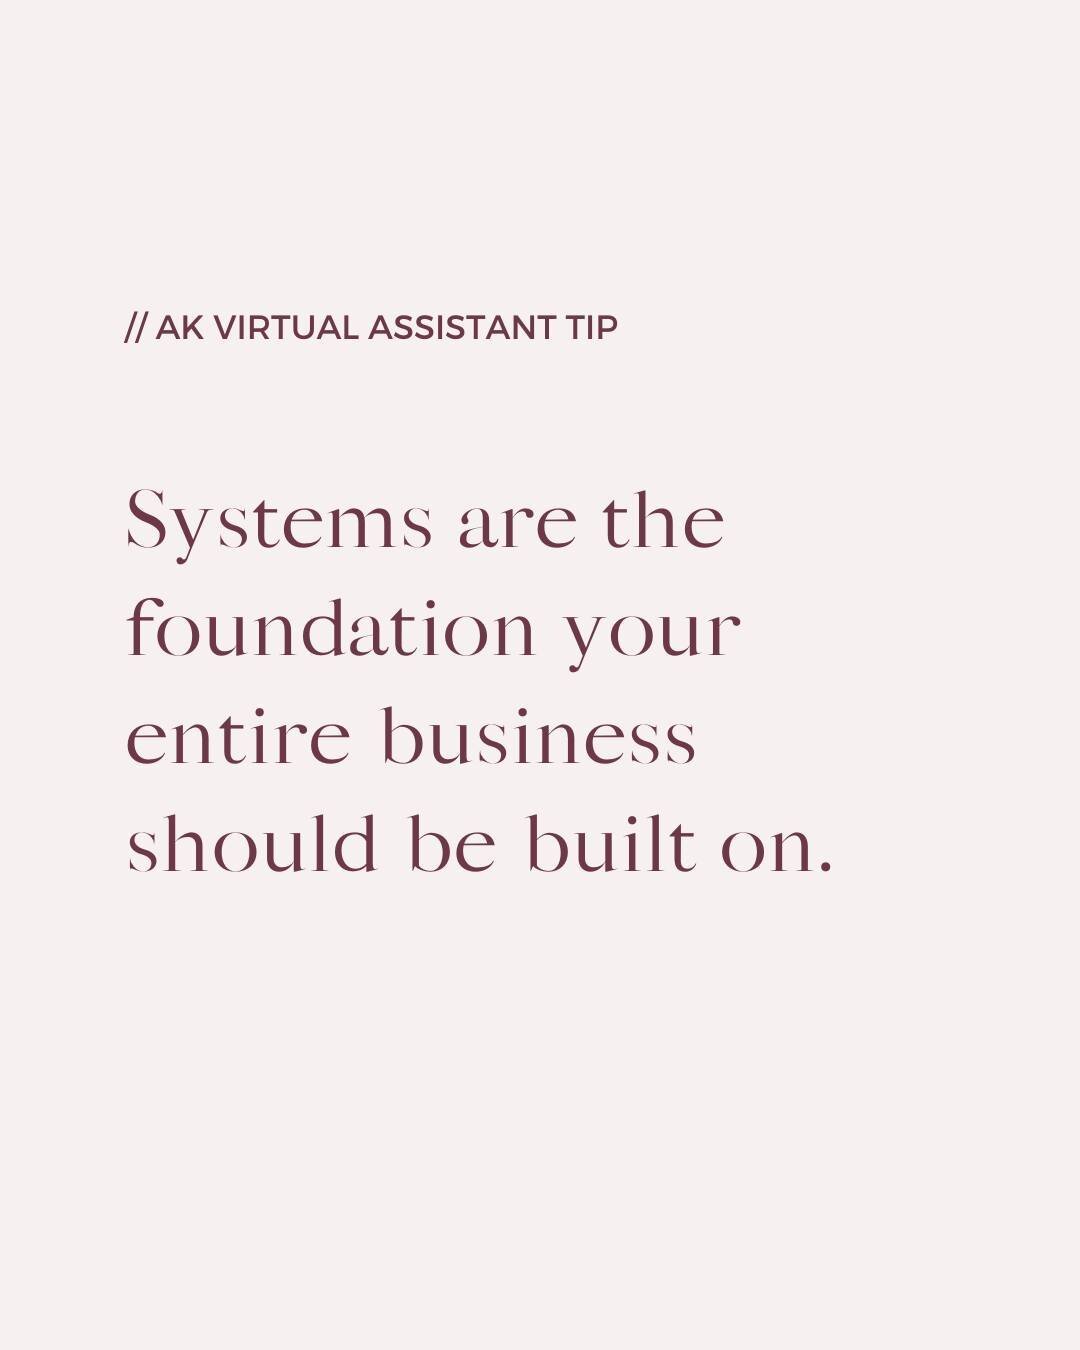 The one thing that will allow your business to scale with ease and joy. &darr;⁠
⁠
Whether you&rsquo;re a brand new entrepreneur just getting started or you&rsquo;ve been in business for some time, there&rsquo;s one thing you absolutely must build out